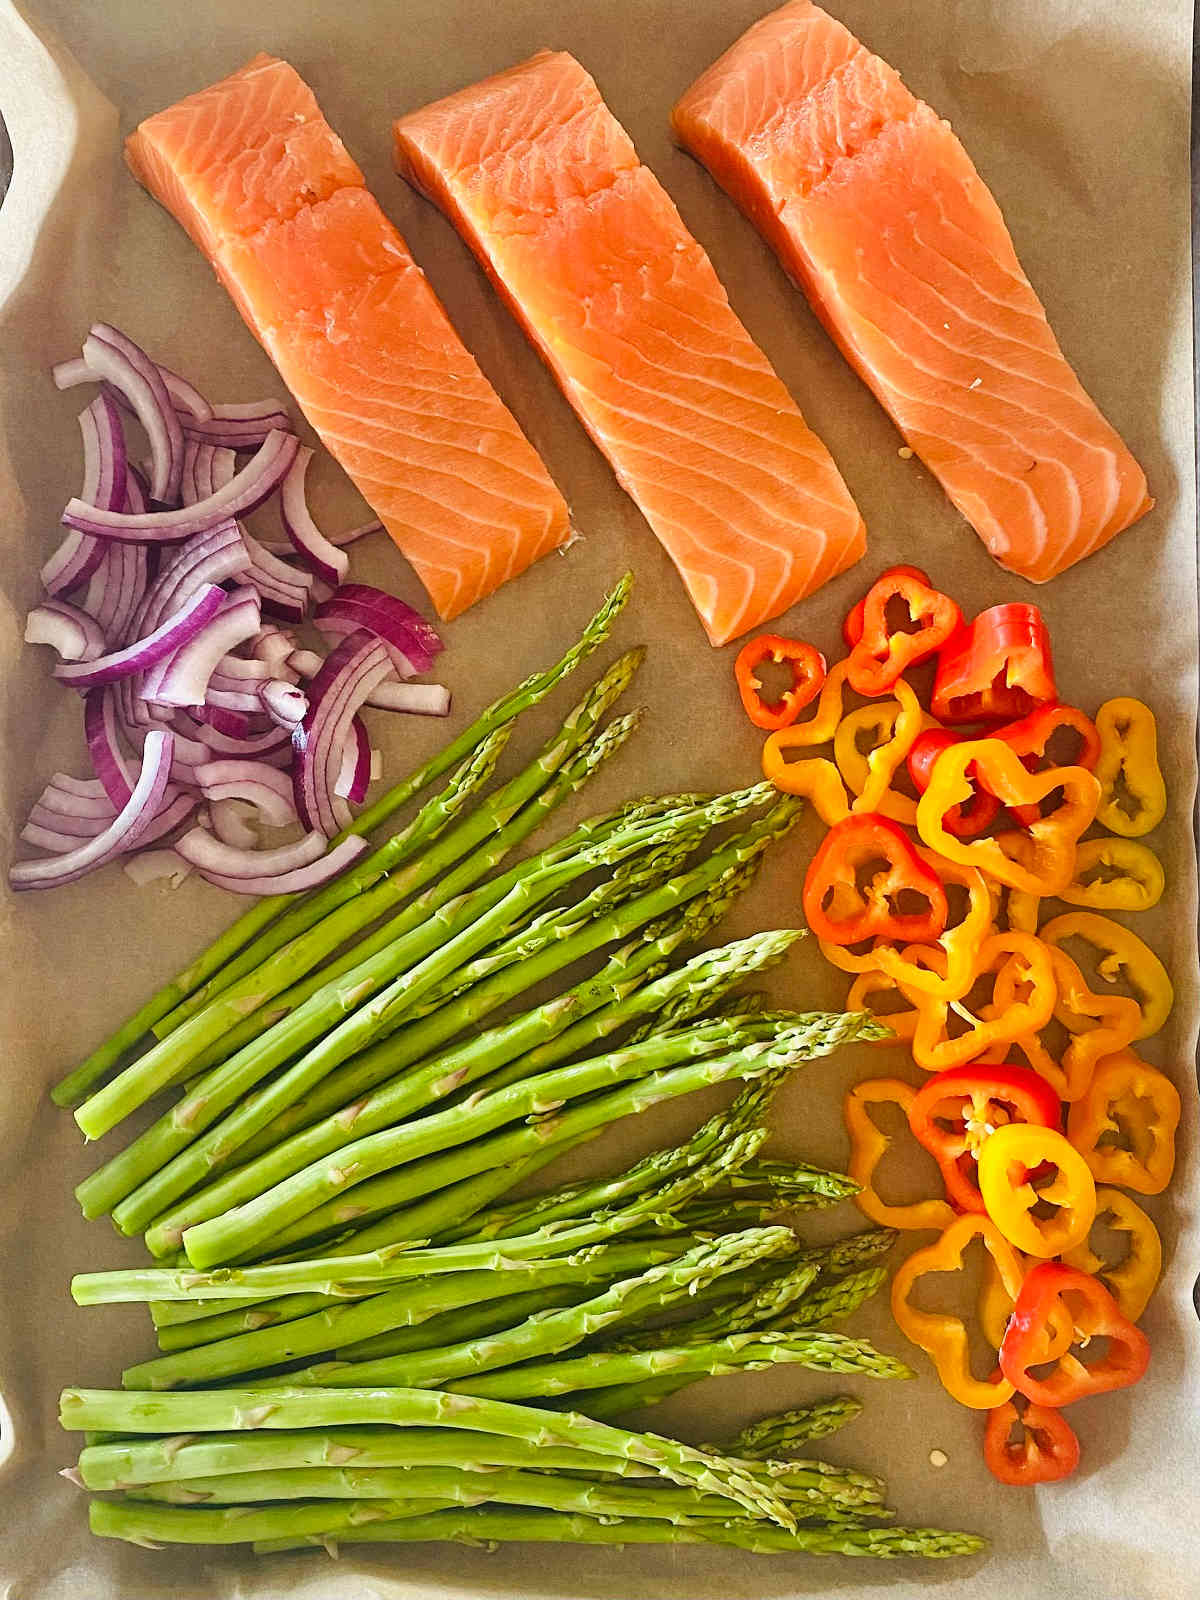 raw salmon, sliced peppers, sliced onions and asparagus on a sheet pan before cooking.